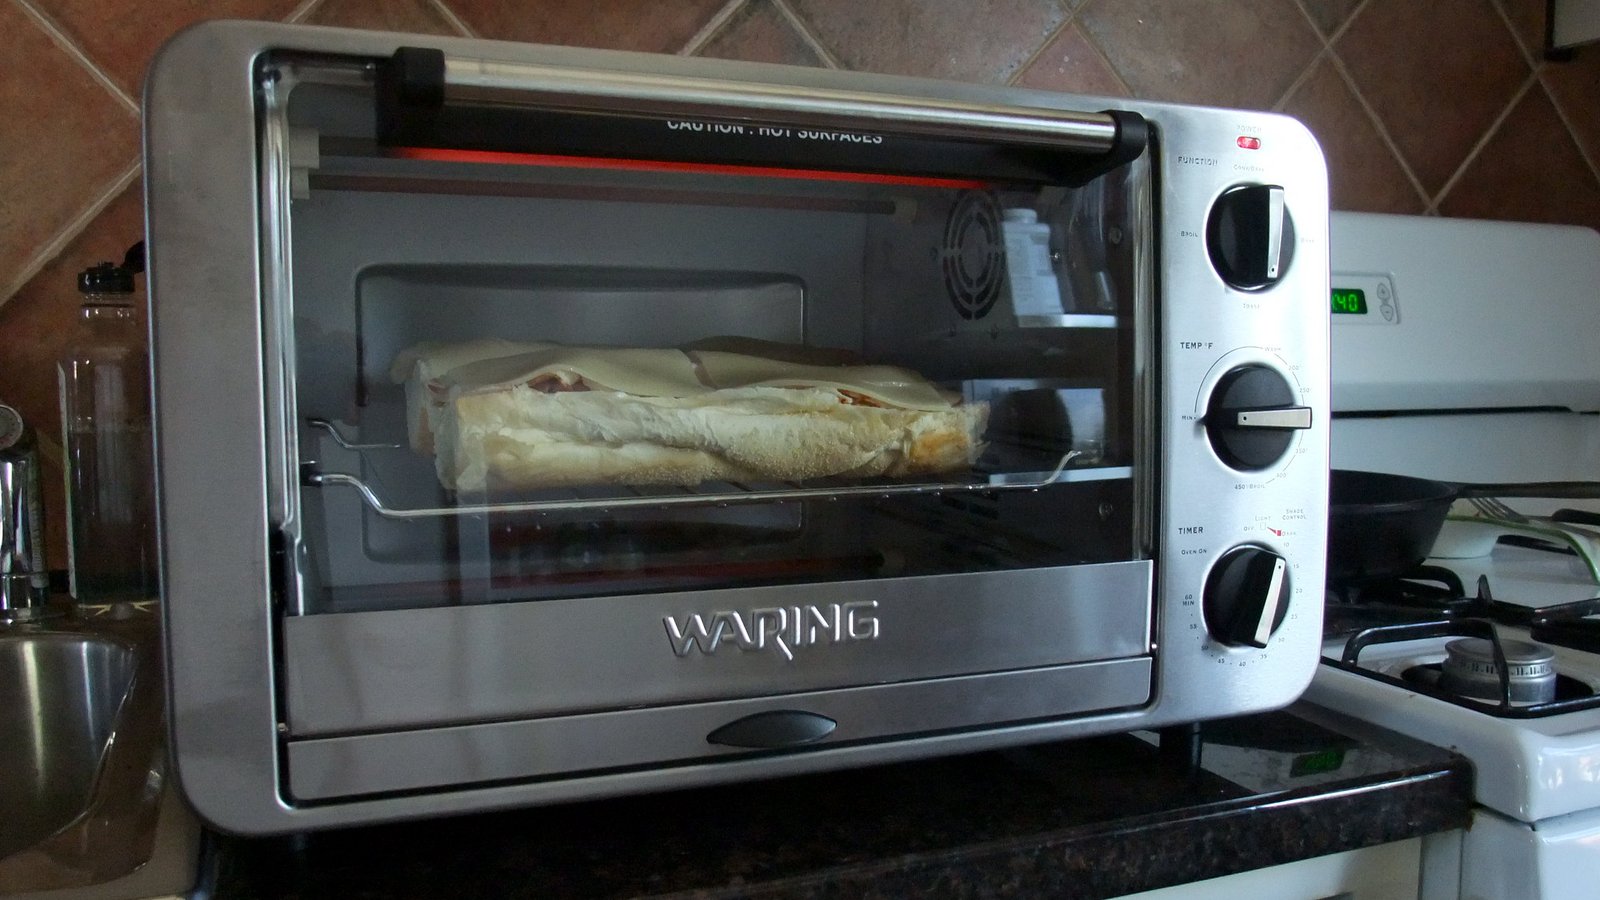 How To Preheat A Toaster Oven